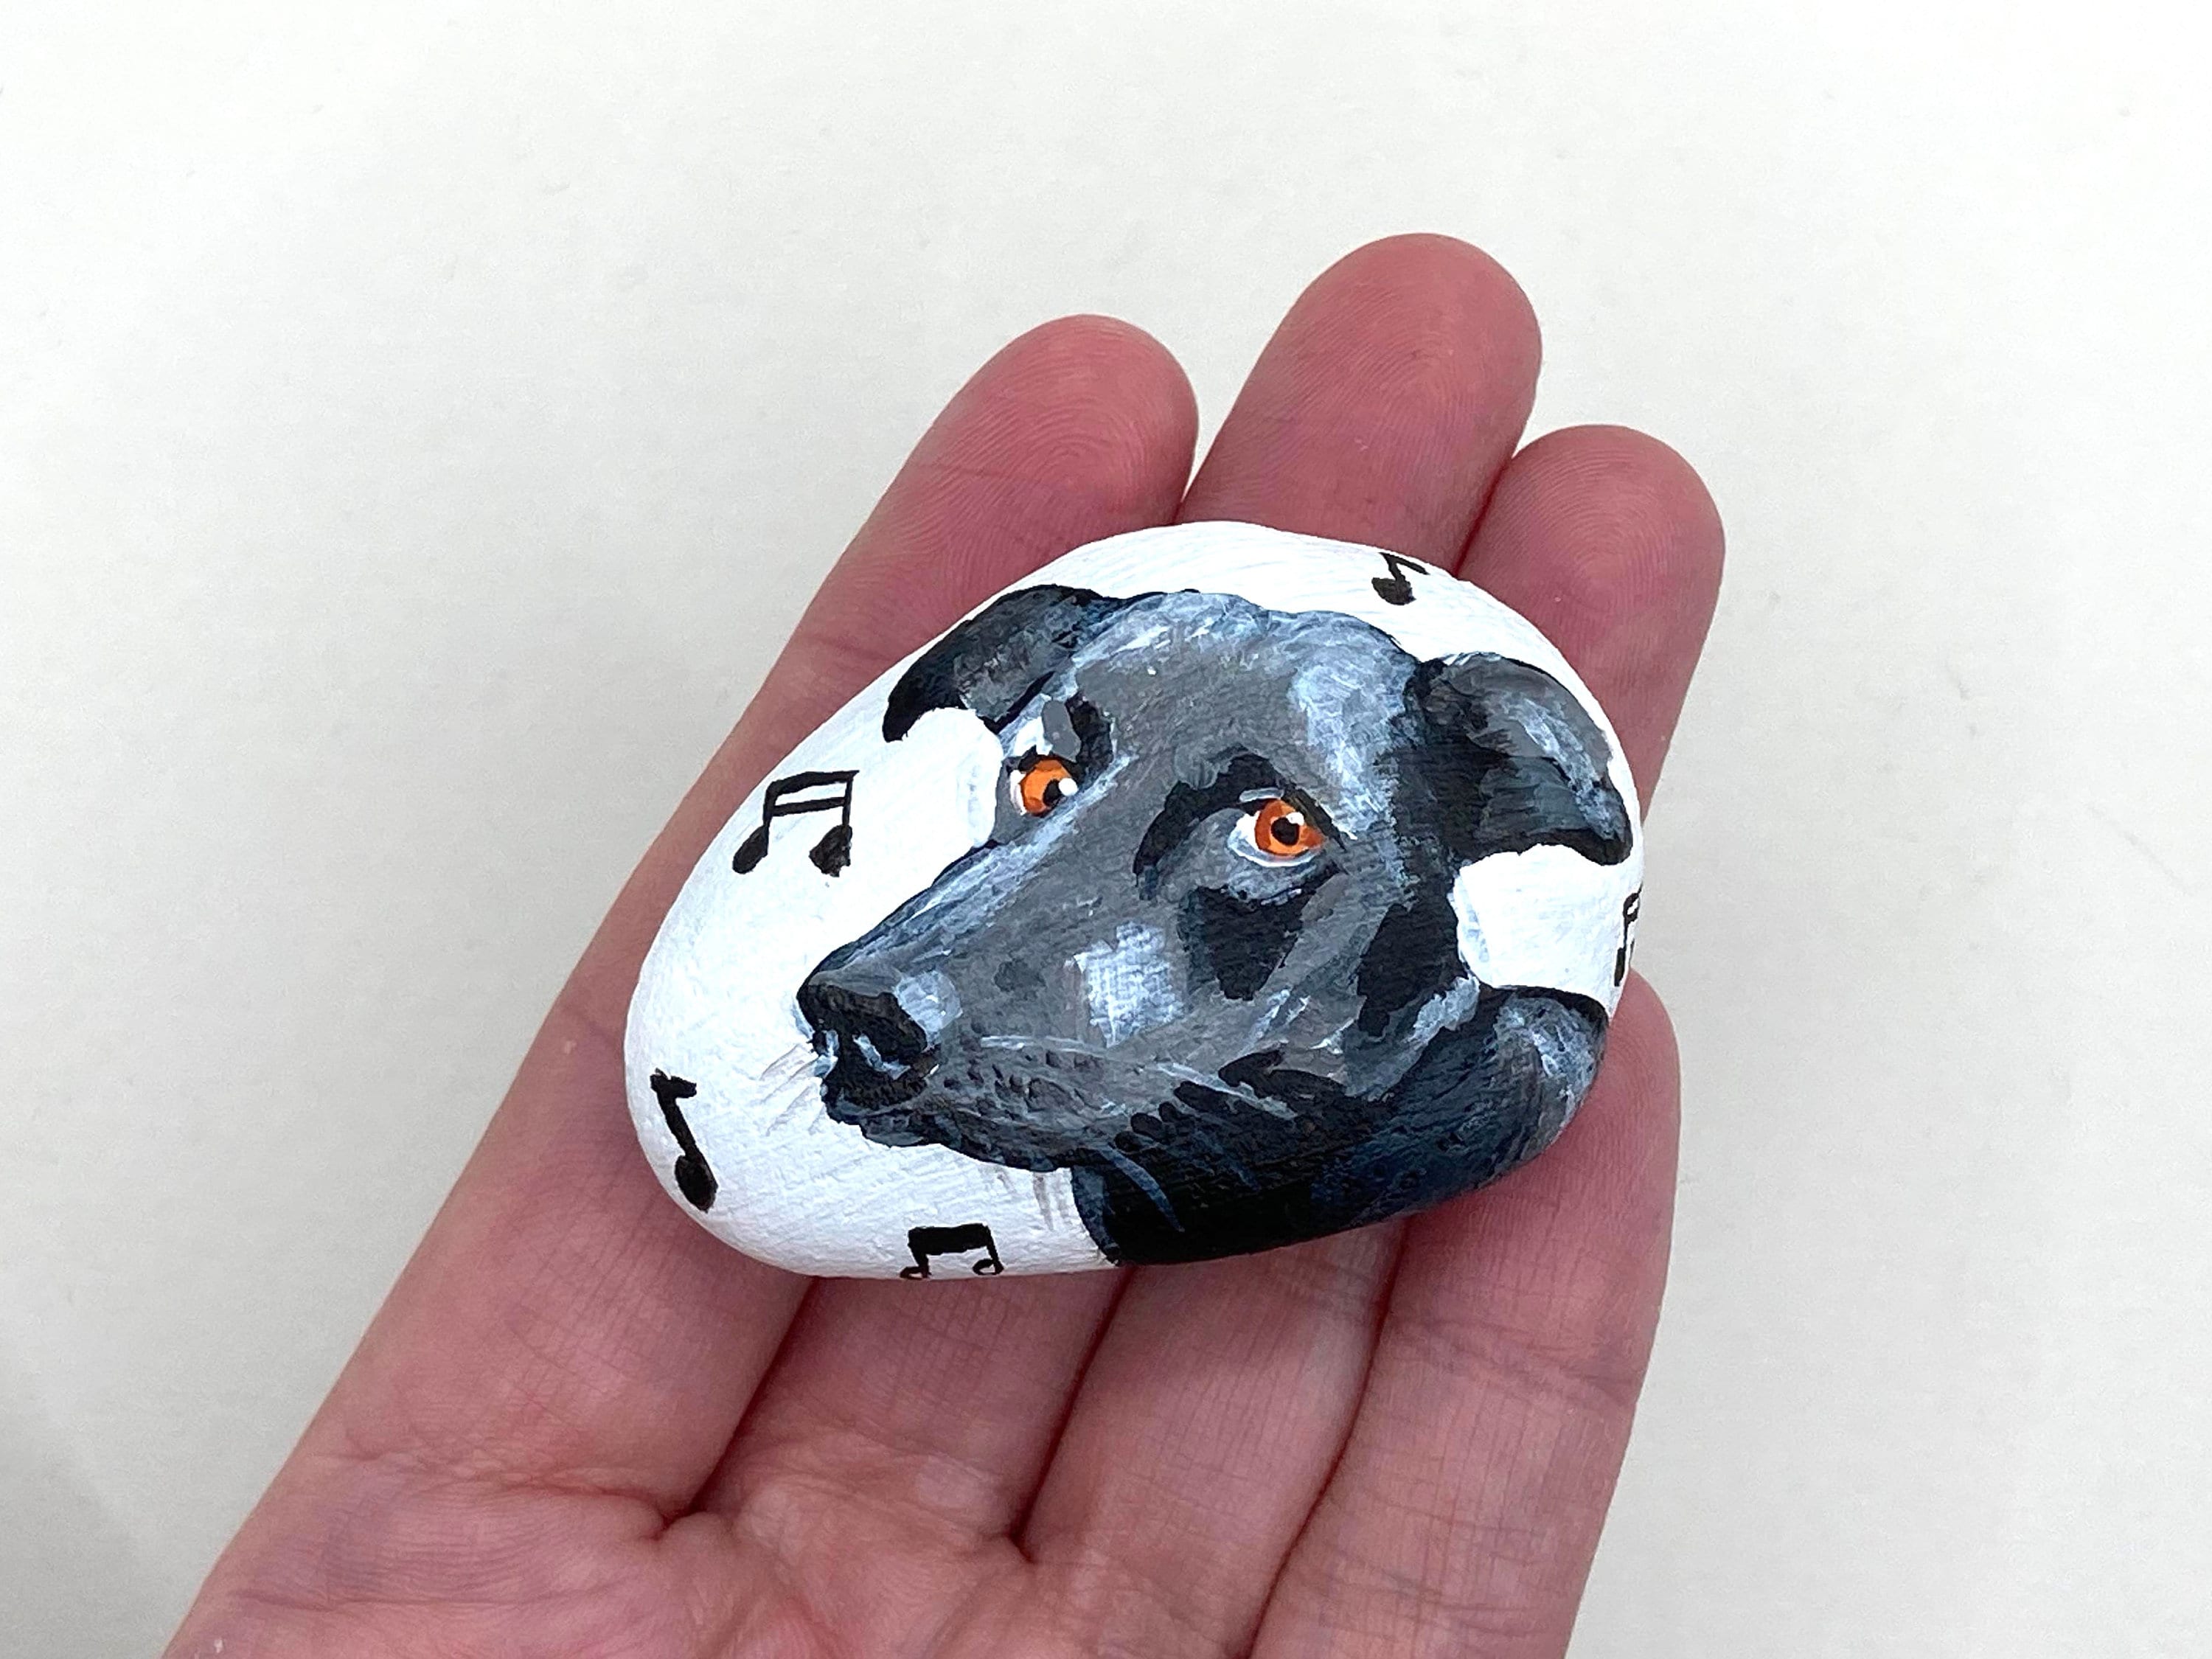 Okay so I got a rock and painted a face, is this how you get a pet